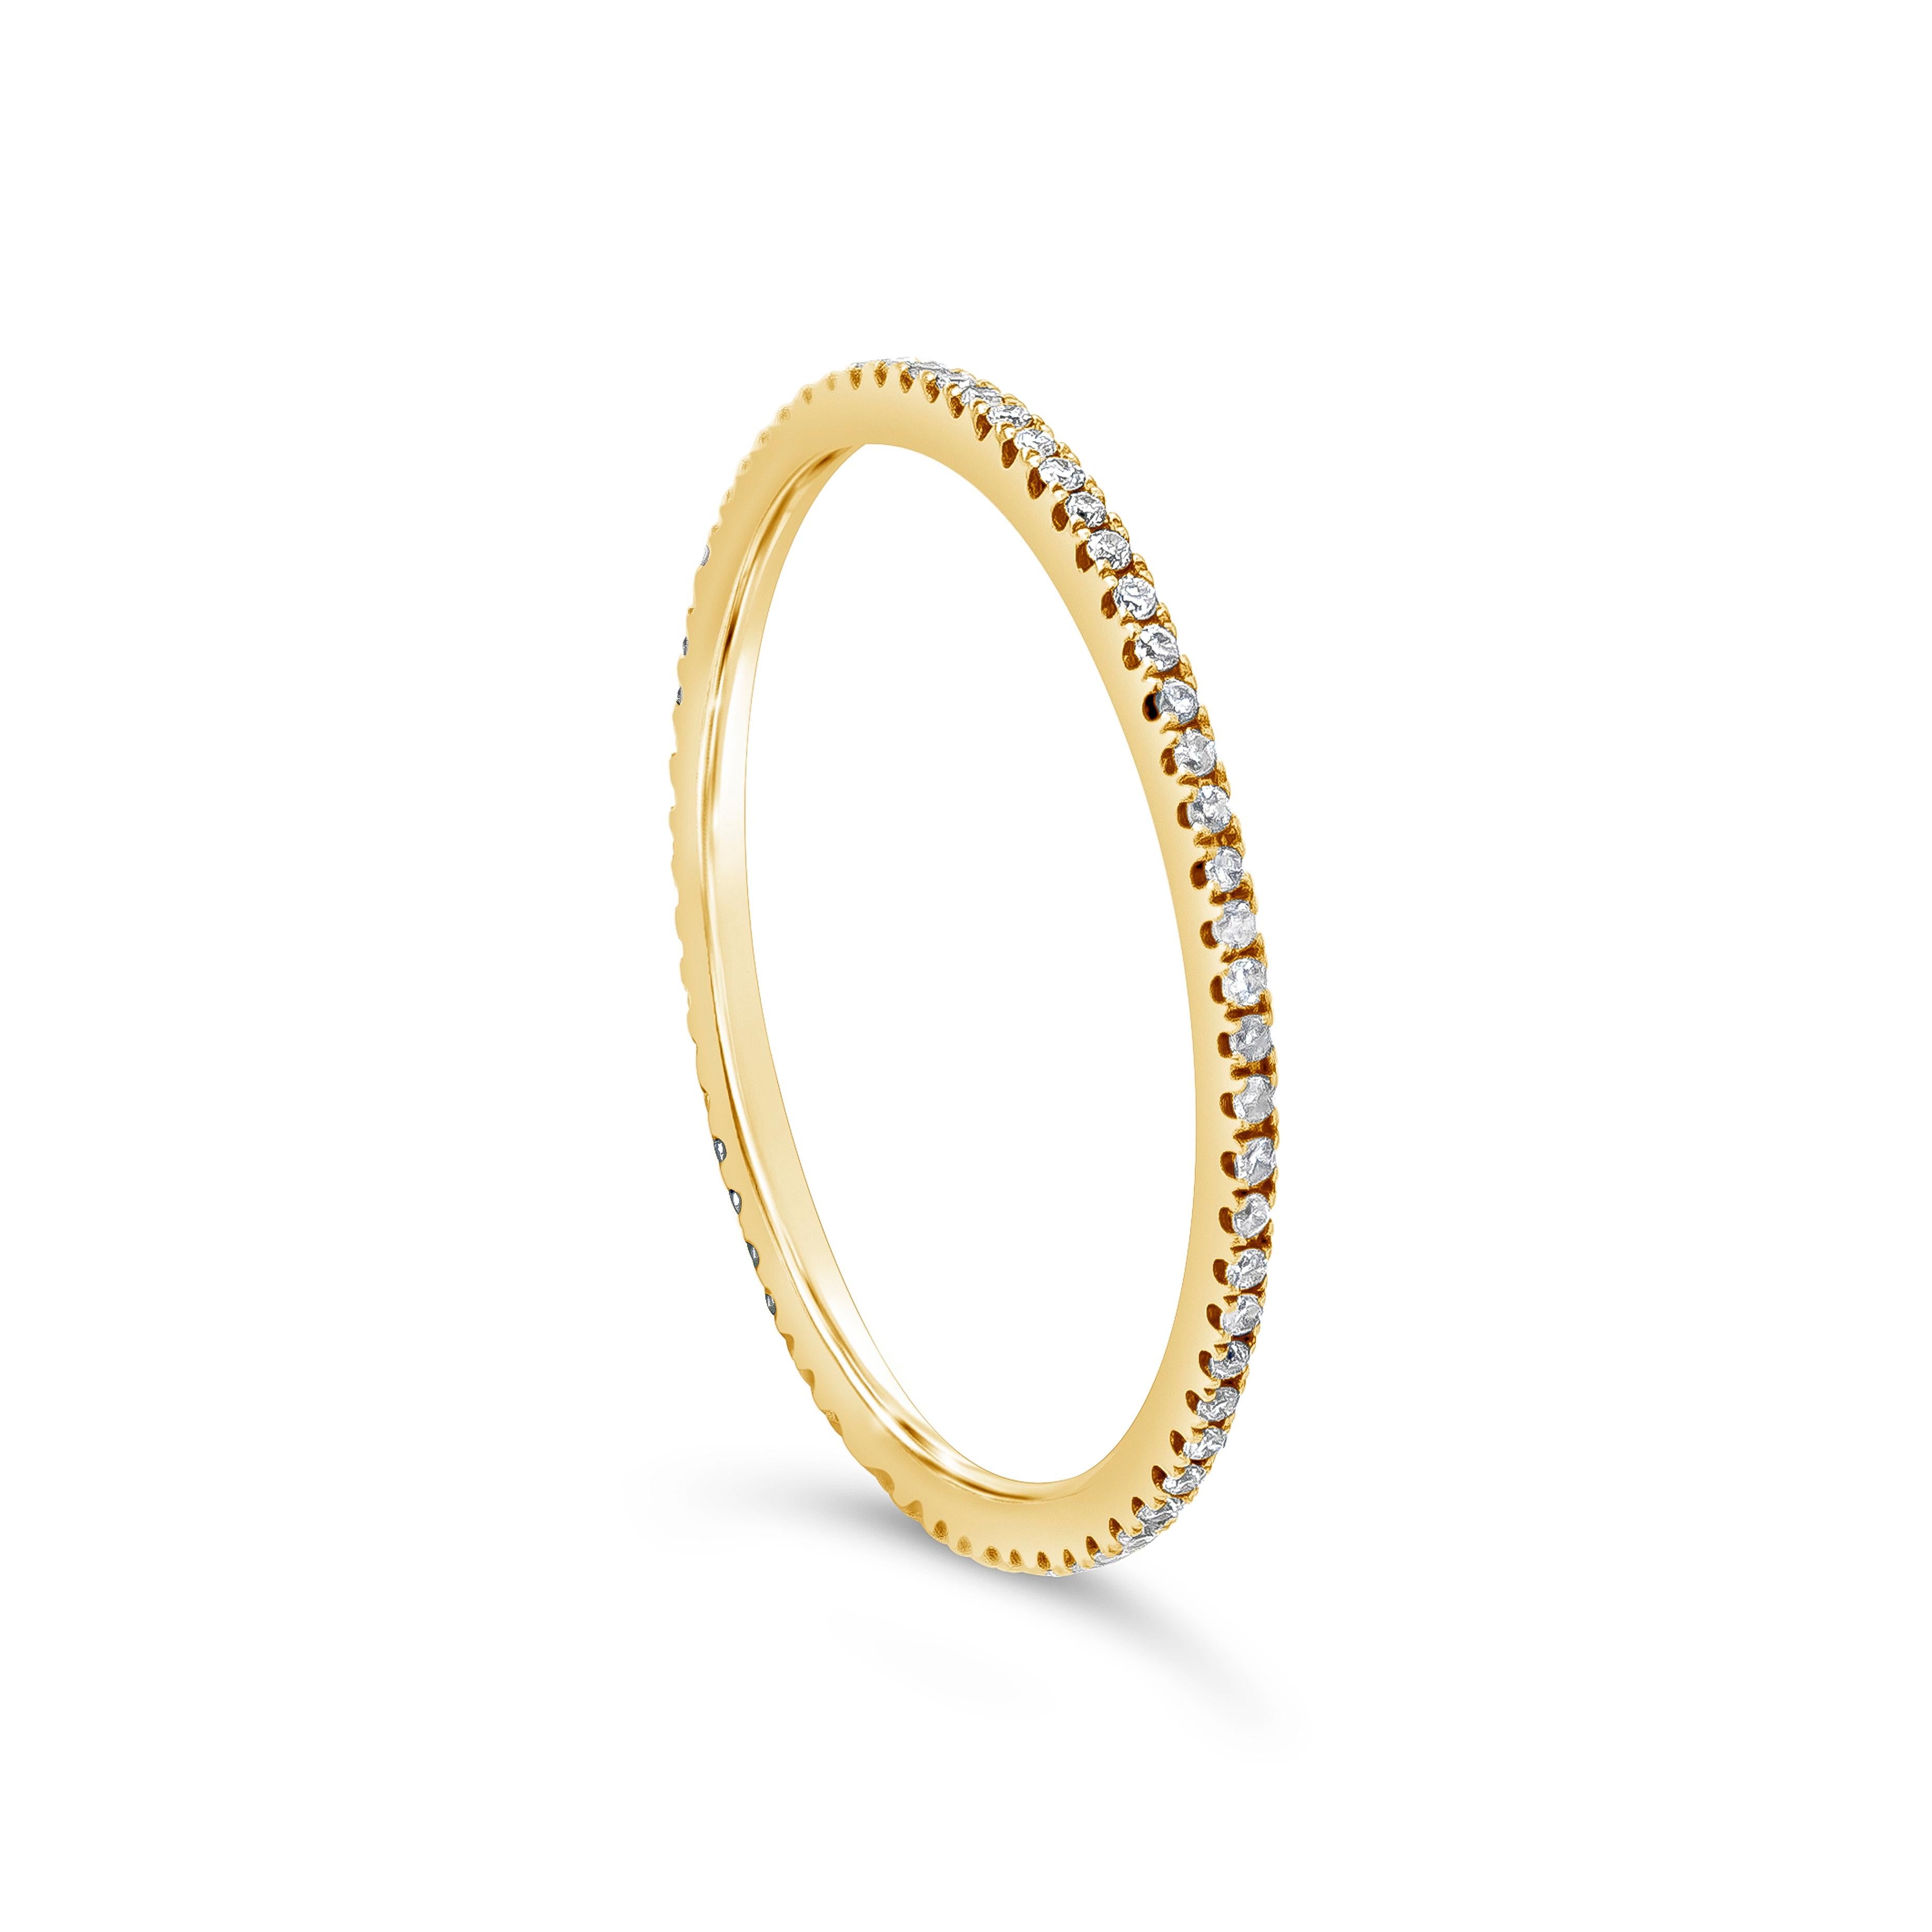 A simple eternity wedding band that is perfect as a spacer between an engagement ring and wedding band. Showcasing a row of round melee diamonds weighing 0.14 carats total, Made with 18K Yellow Gold Size 7.25 US.

Roman Malakov is a custom house,